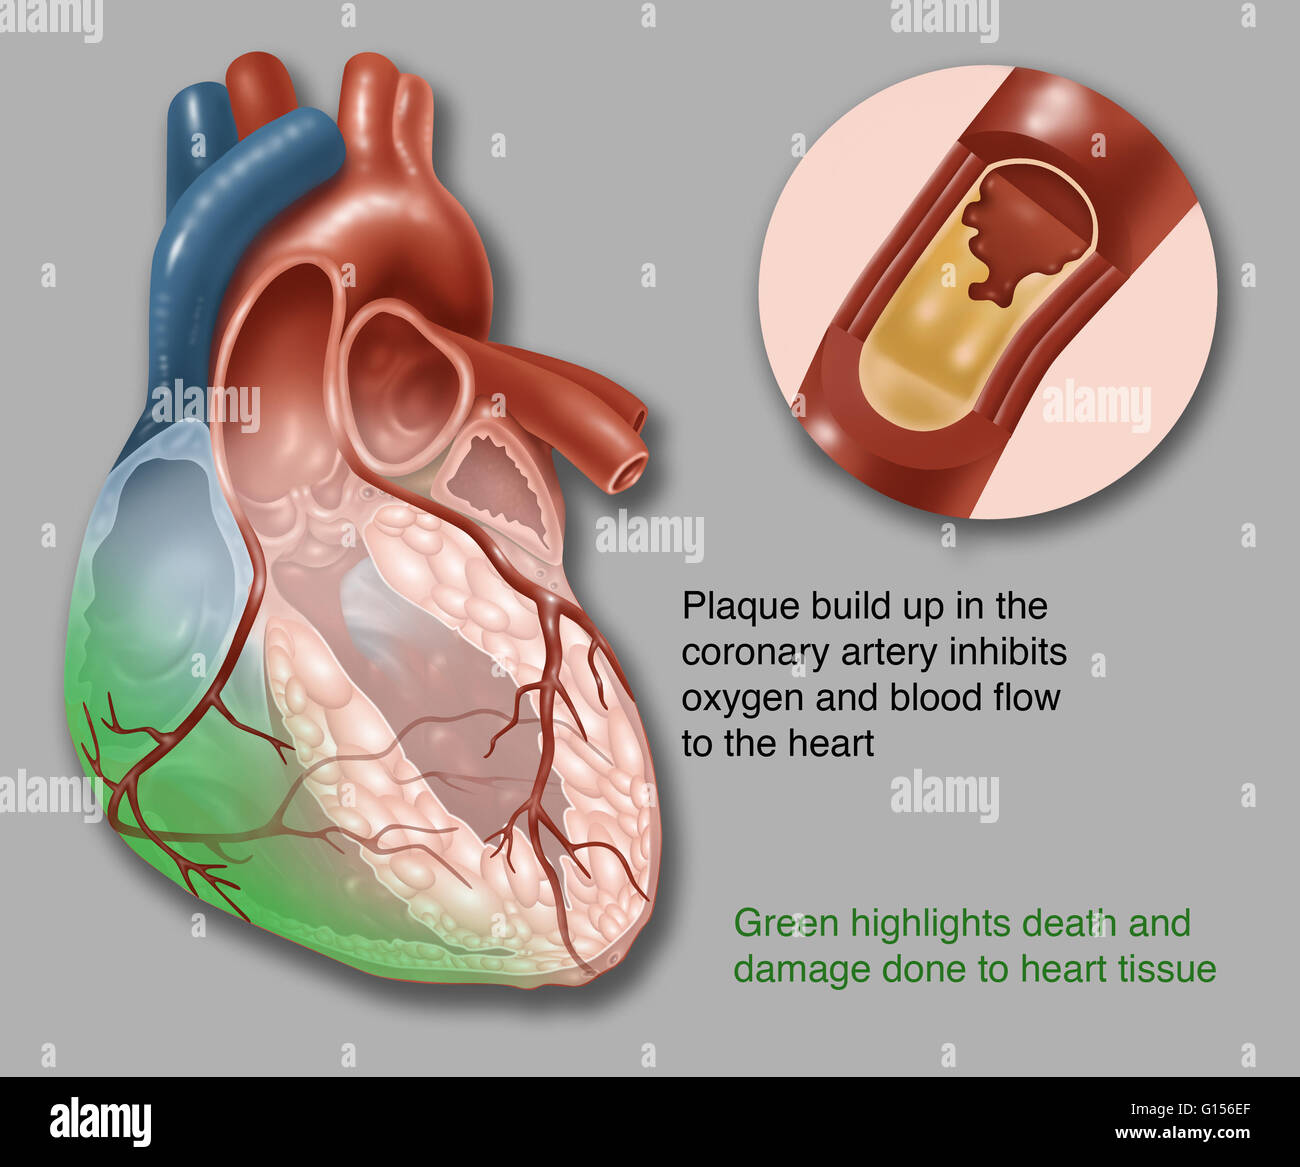 Llustration Showing Acute Heart Failure Plaque Build Up In The